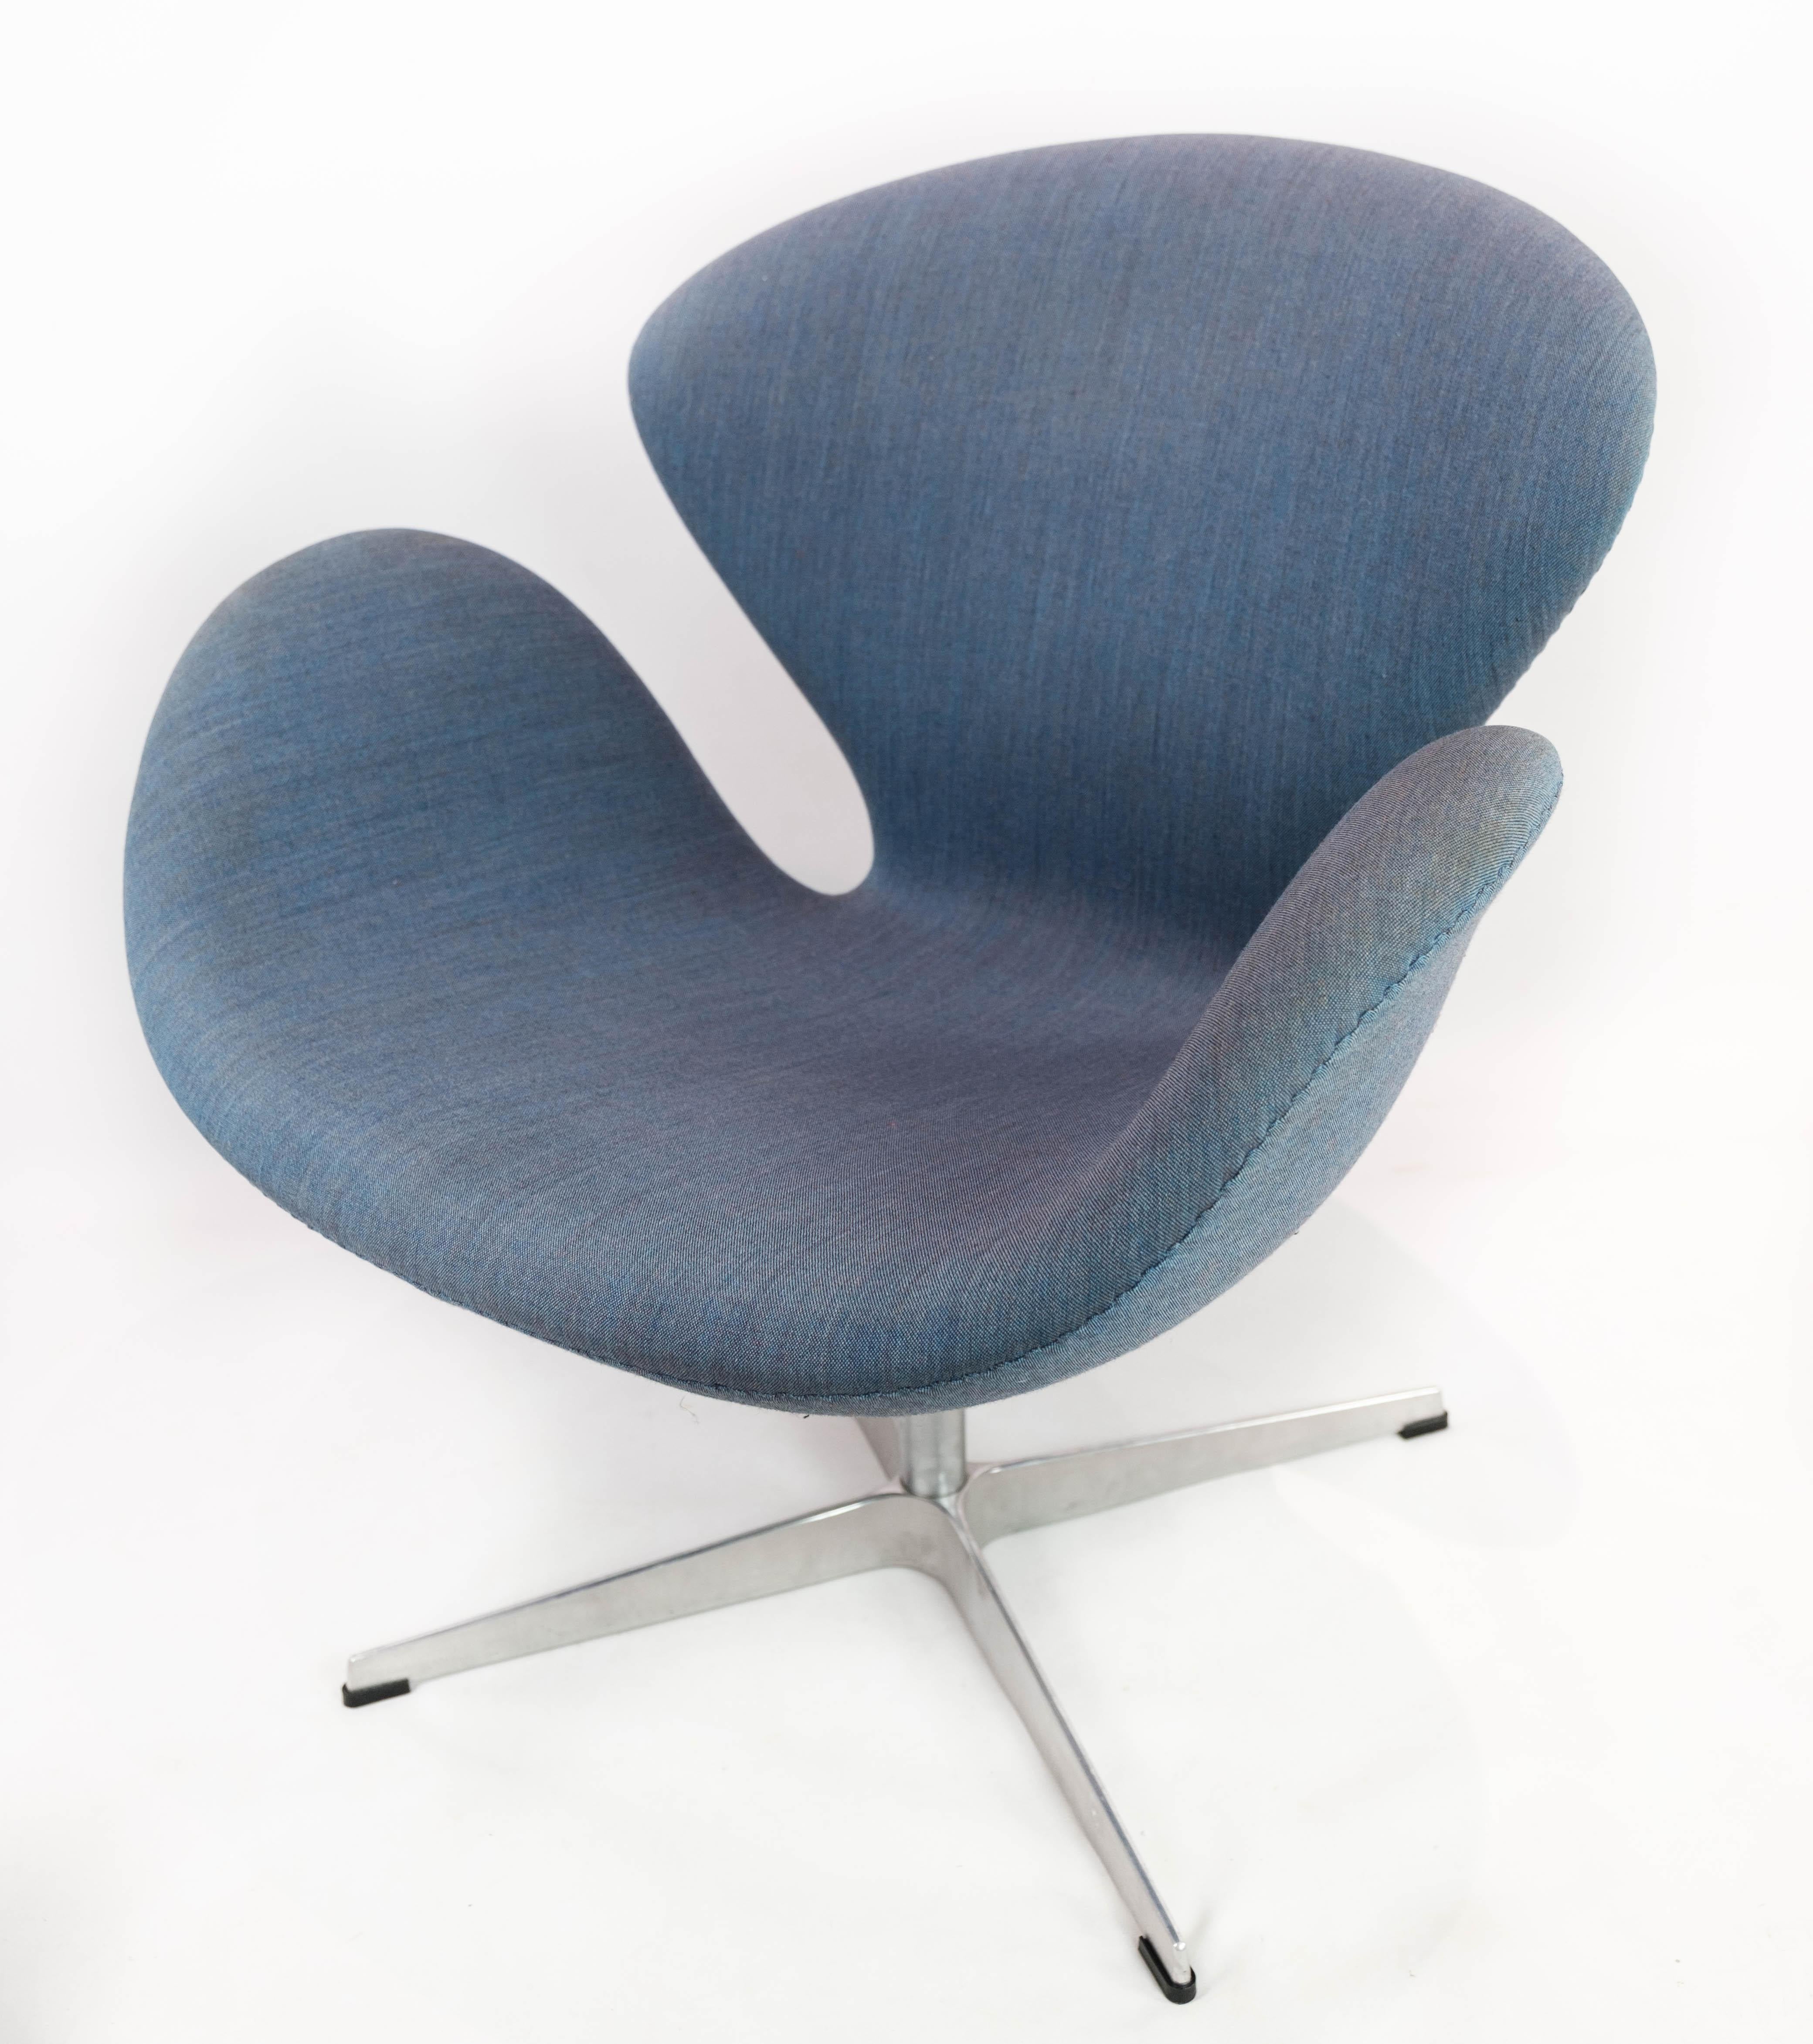 The swan chair, model 3320, designed by Arne Jacobsen in 1958 and manufactured by Fritz Hansen in 2014. The chair is with original upholstery in blue wool fabric and is in great vintage condition.